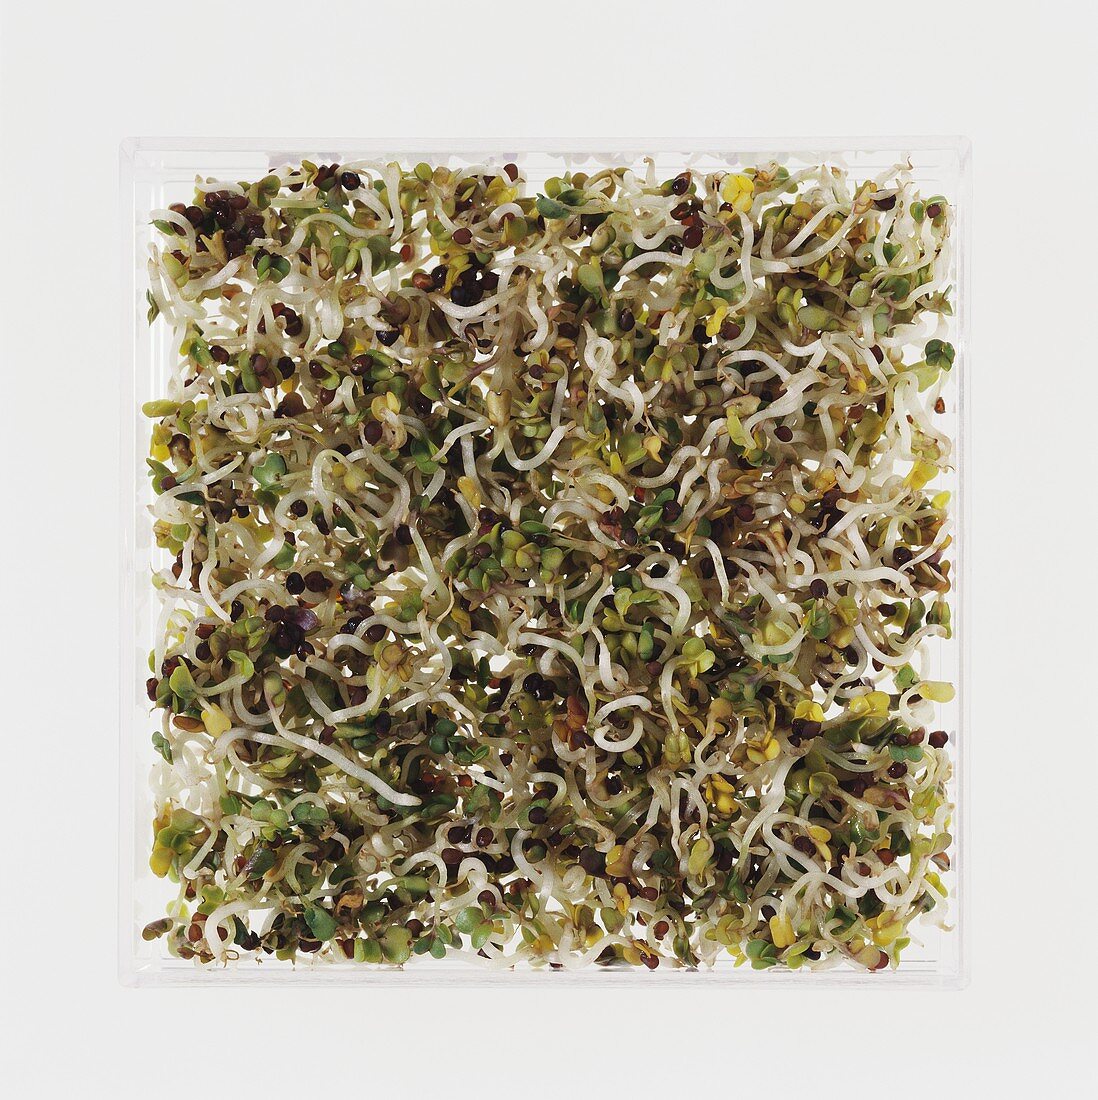 Lots of broccoli sprouts